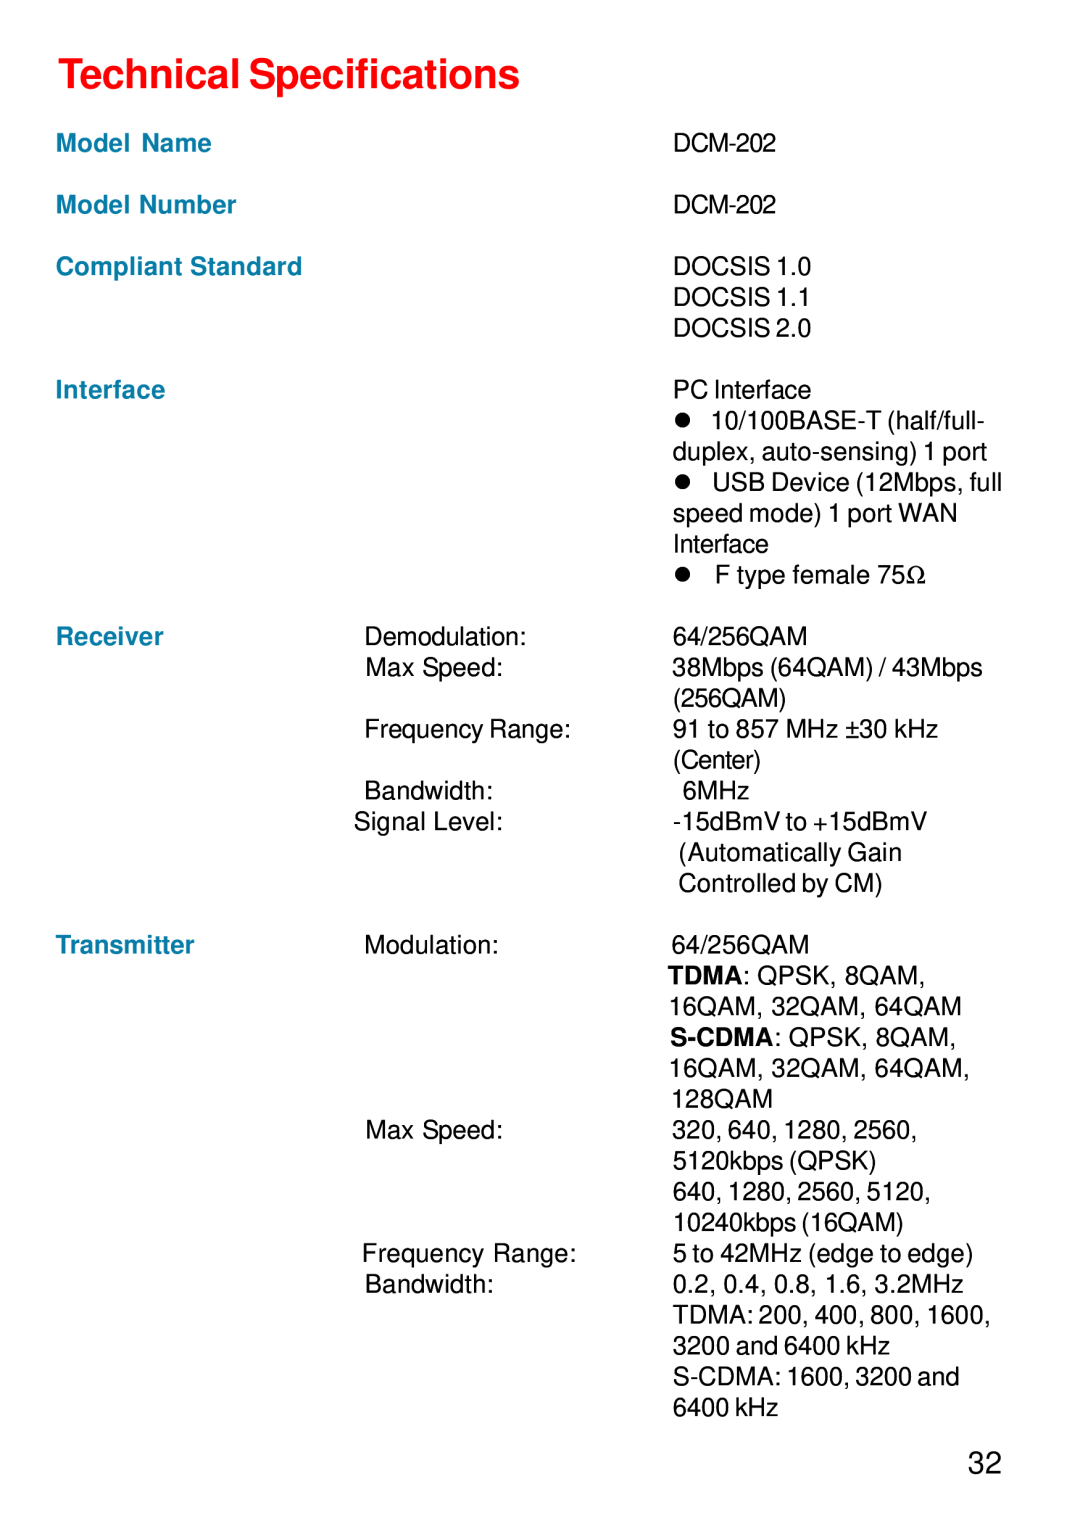 D-Link DCM-202 Technical Specifications, Model Name, Model Number, Compliant Standard, Interface, Receiver, Transmitter 